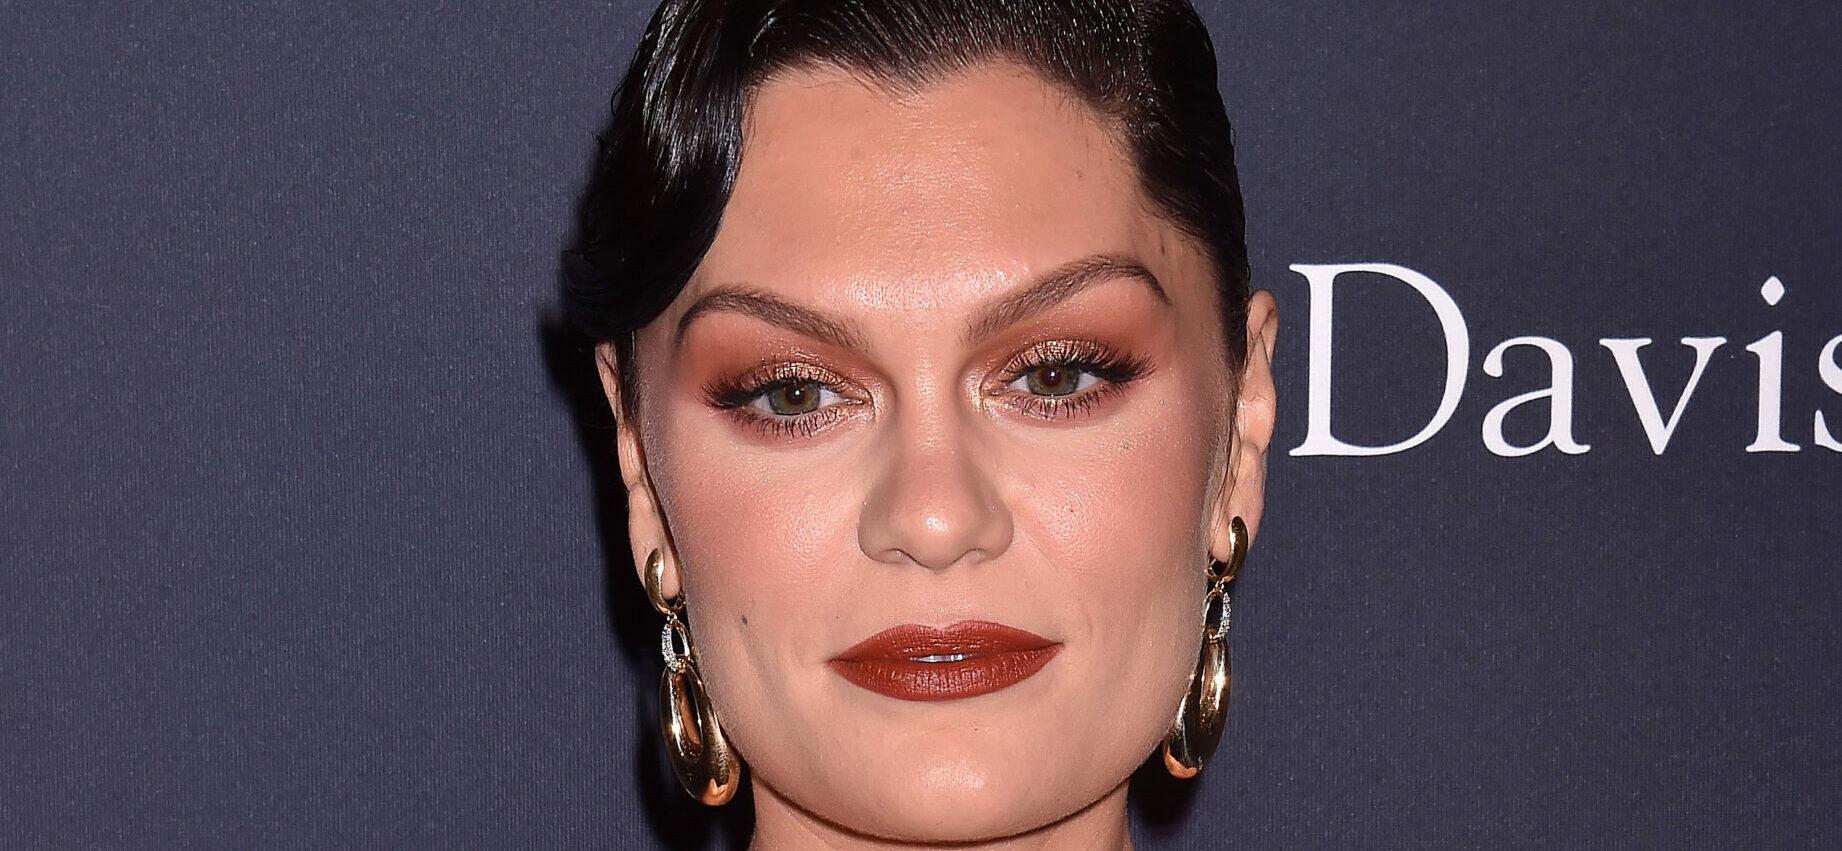 Jessie J Announces Birth Of Her First Baby After Previous Miscarriage: ‘My Whole Life Changed’